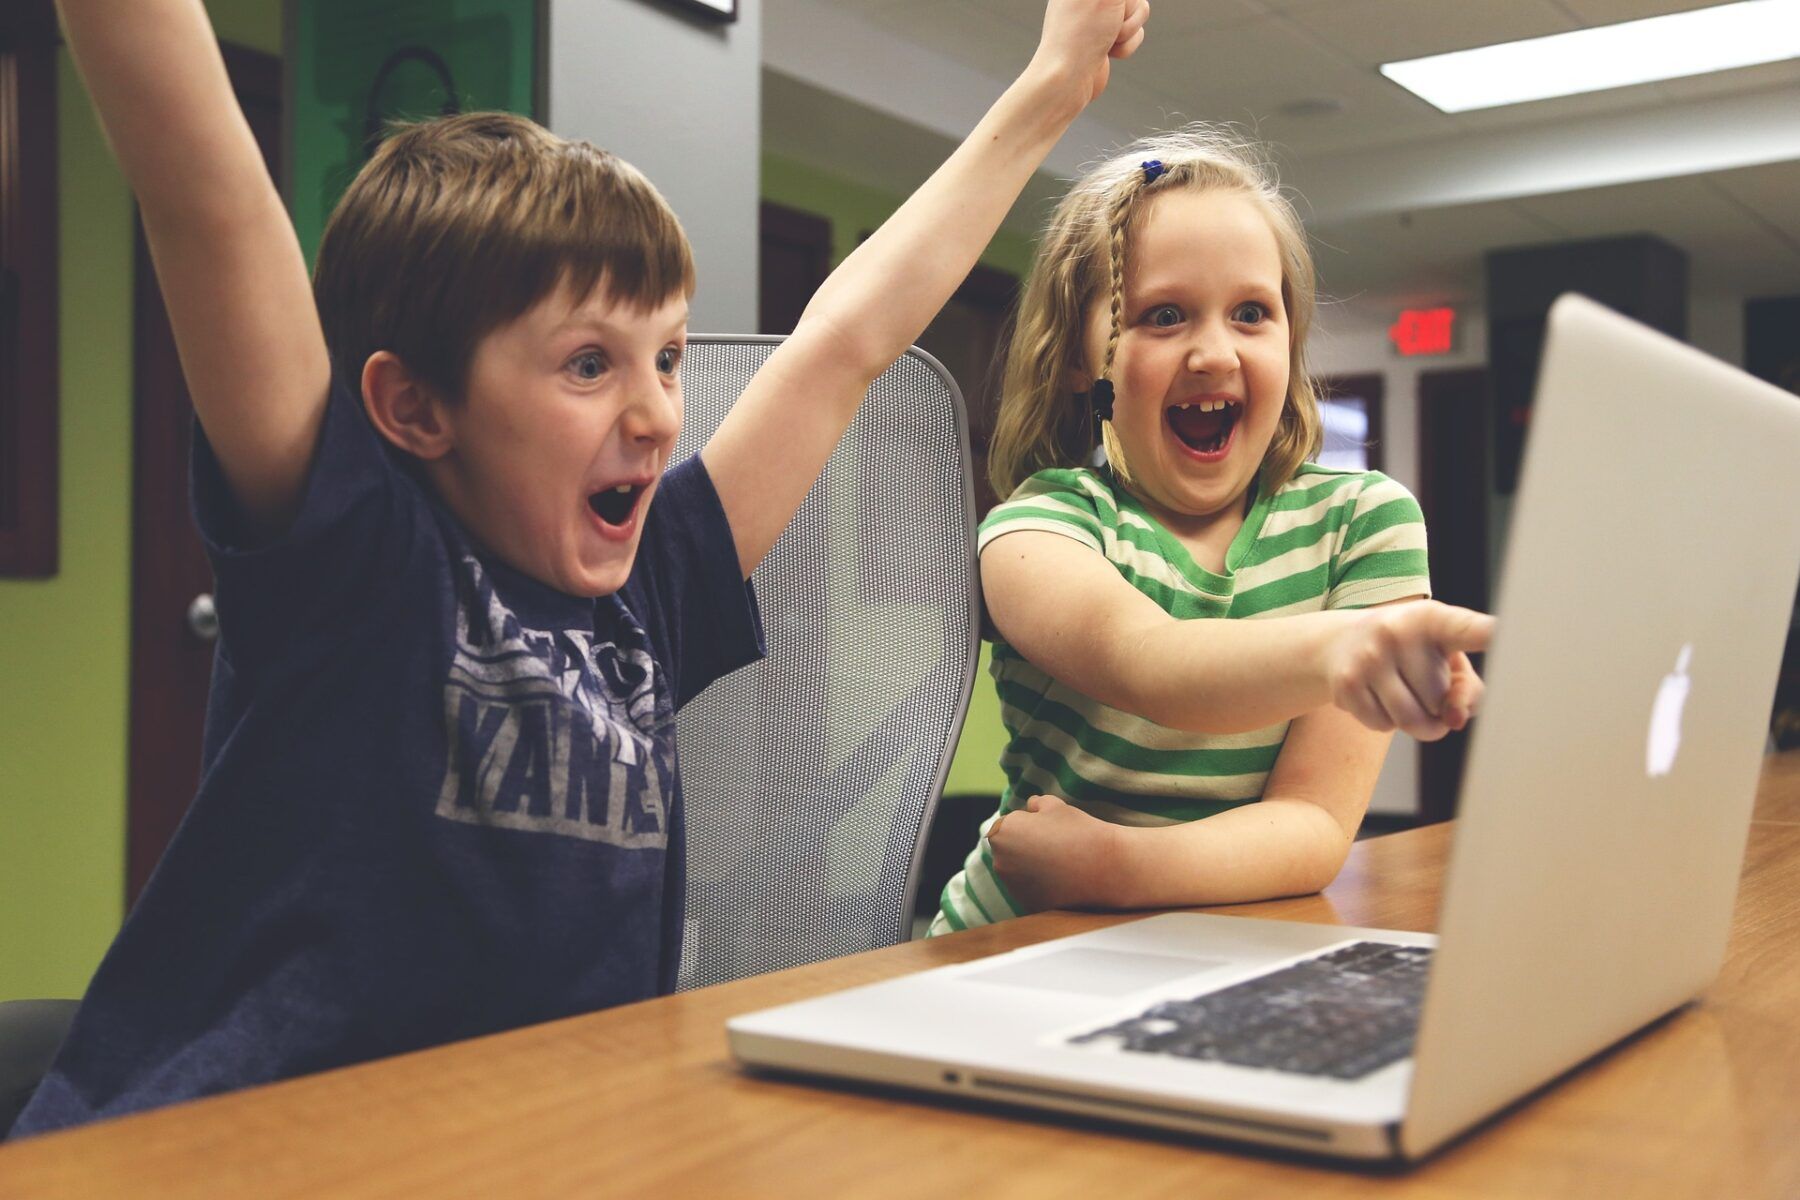 Children cheering at a computer screen.